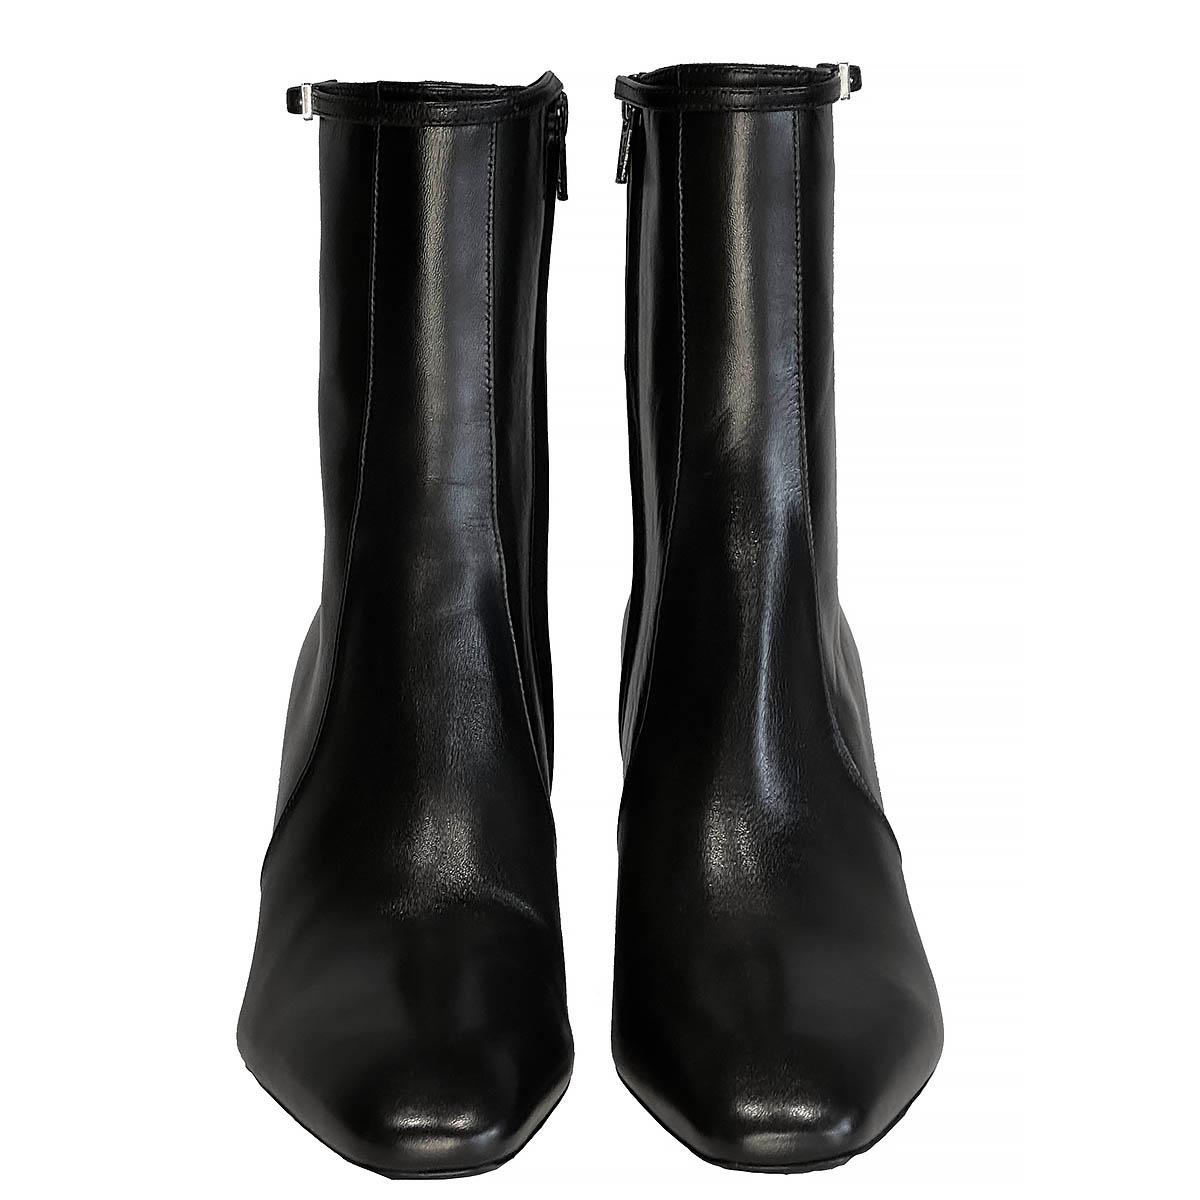 100% authentic Saint Laurent Betty 70 ankle boots black lambskin leather. Feature thin buckled ankle straps, block heel and square pointed toes. Open with a zipper on the side. Brand new. Come with dust bag.

Please Note: These ship from the